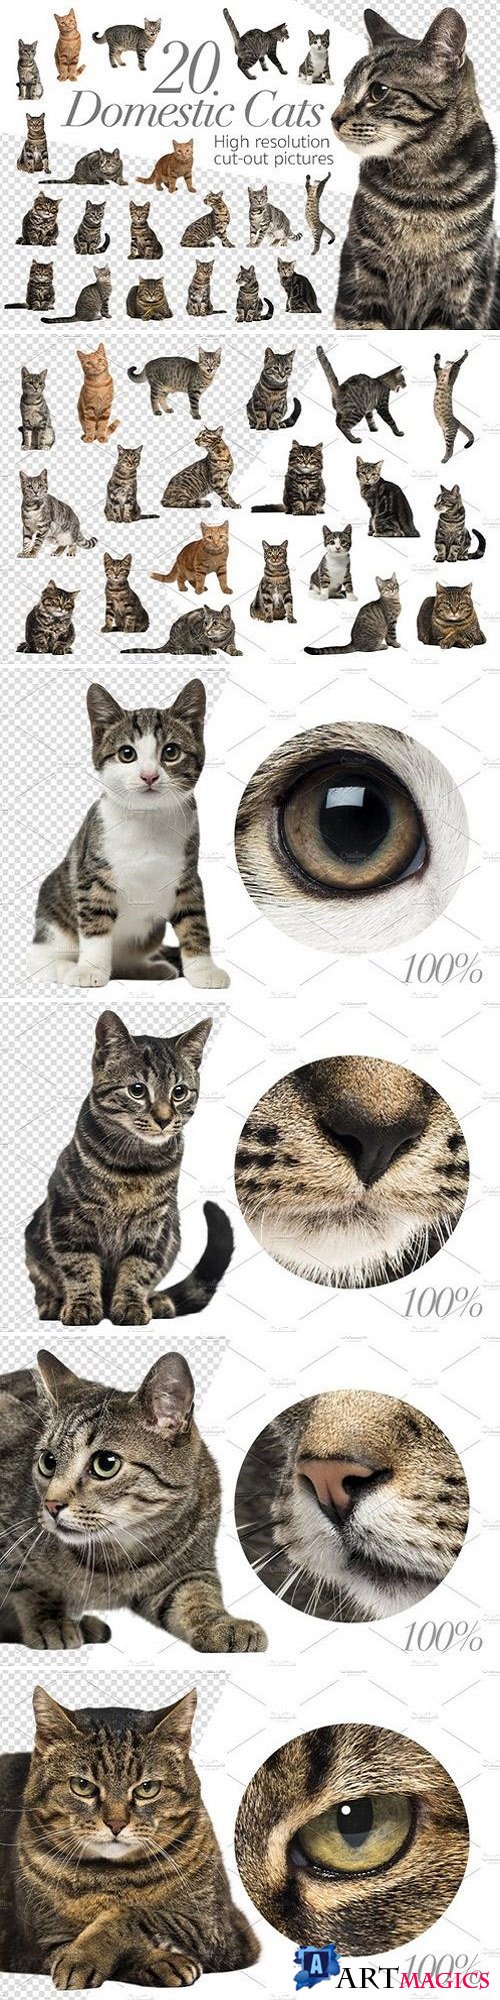 20 Domestic Cats - Cut-out Pictures 2316524